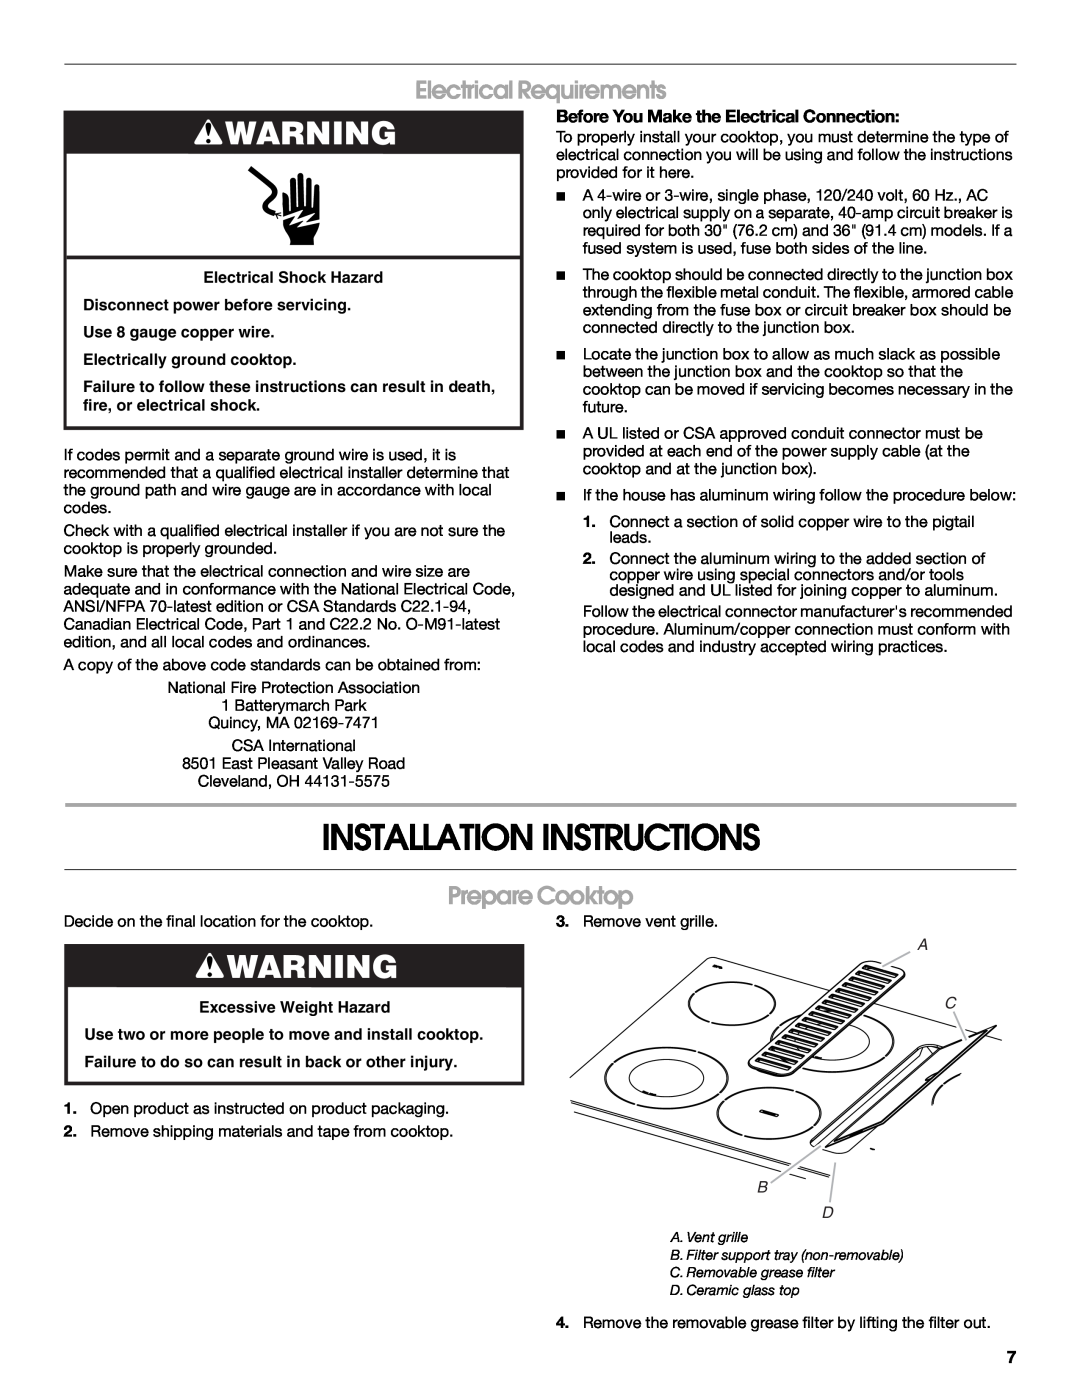 Jenn-Air W10436037B Installation Instructions, Electrical Requirements, Prepare Cooktop, Excessive Weight Hazard, A C B D 